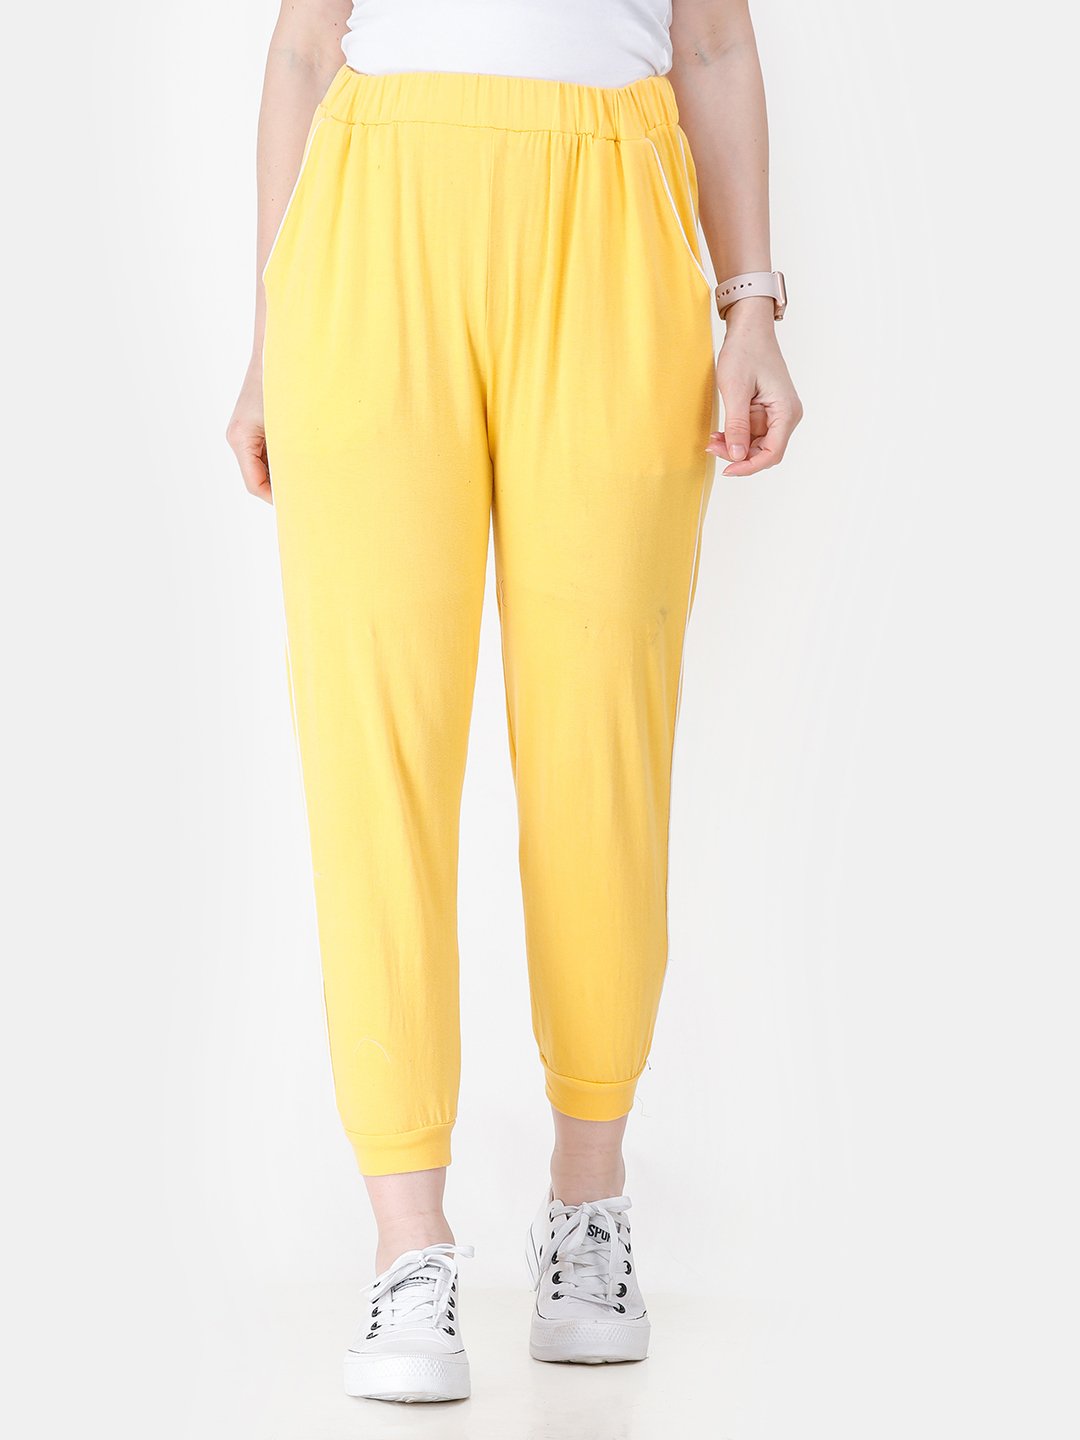 Yellow Solid Track Pants